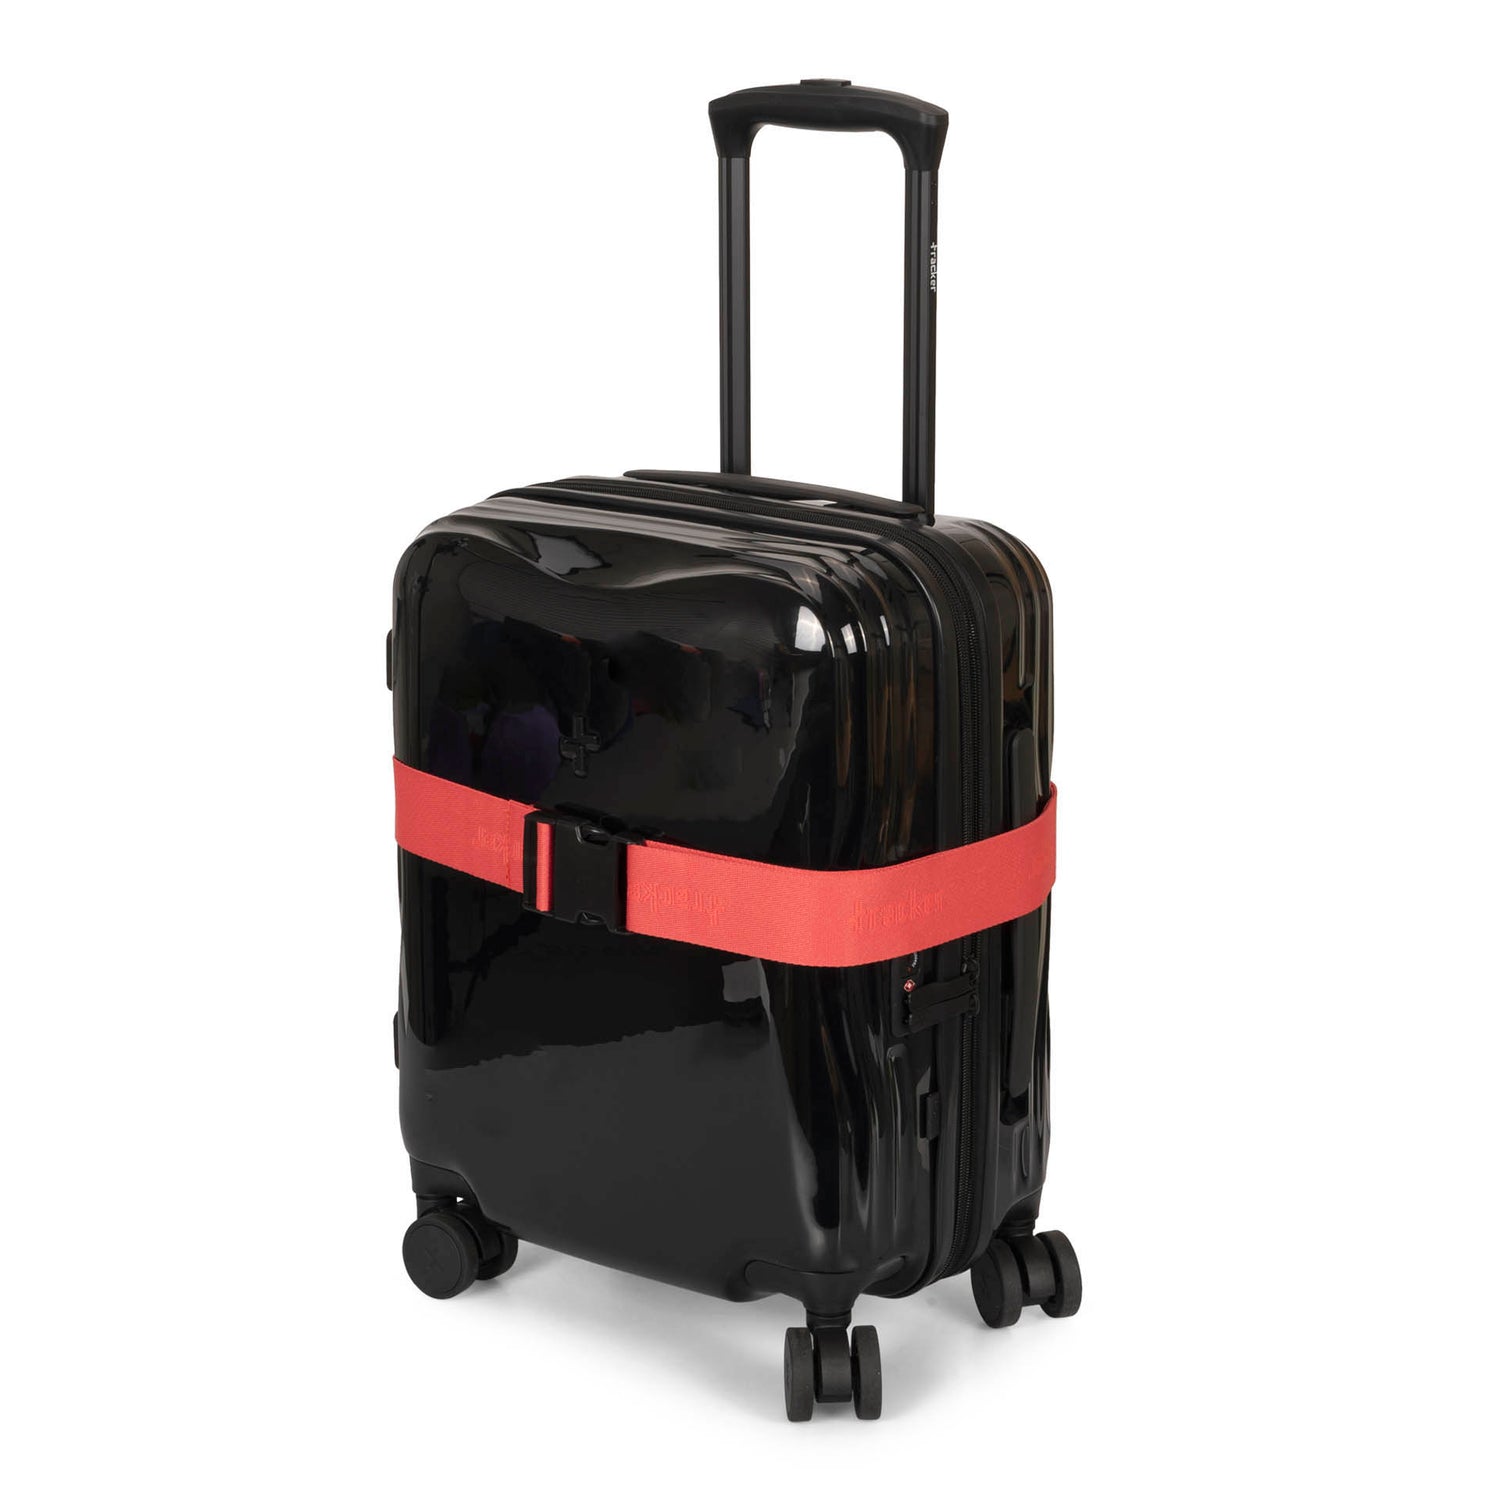 Coral luggage strap designed by Tracker called Tracker Logo wrapped around a luggage (that has its telescopic handle opened) and buckled showing the tracker logo pattern printed on the entirety of the polyester.